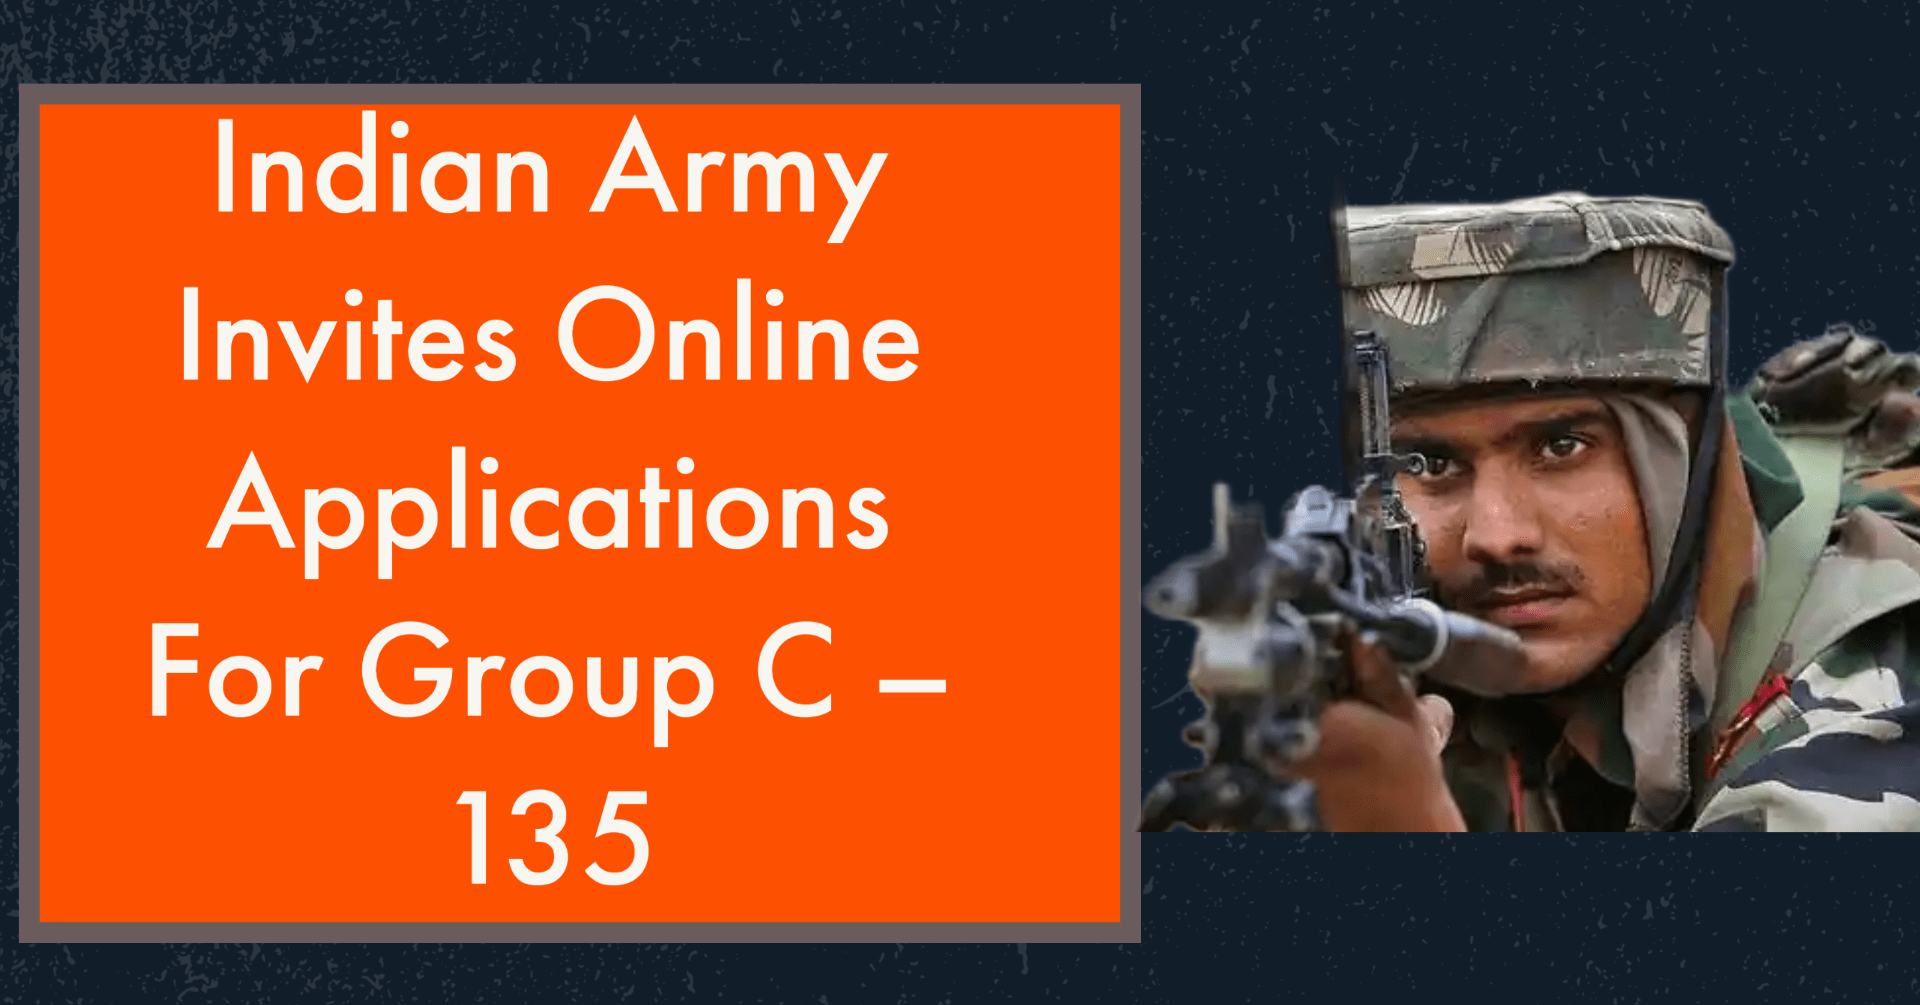 Indian Army invites online applications for Group C – 135